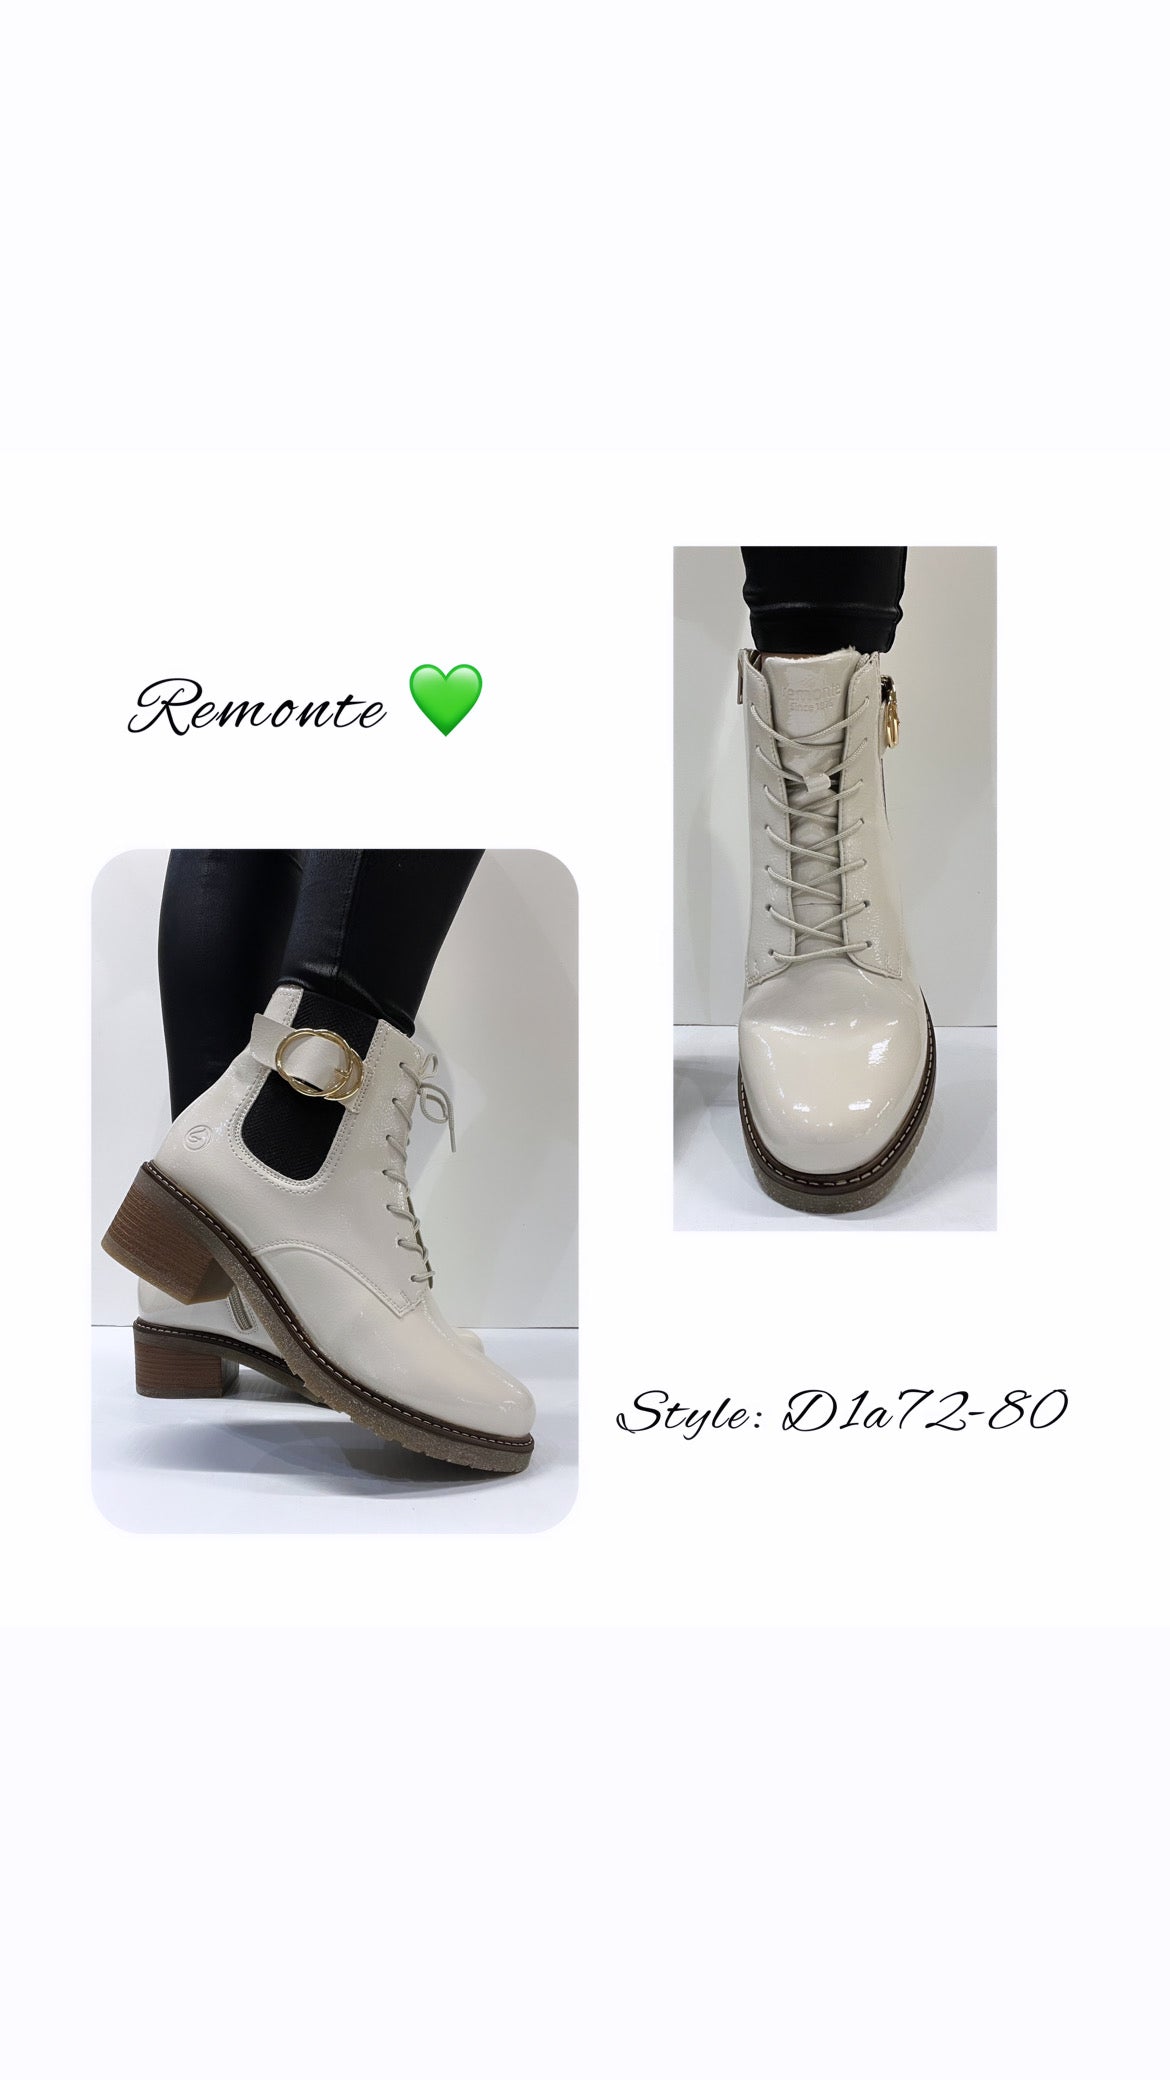 Remonte D1A72-80 Off White Patent Combi Boots with Block Heel mop